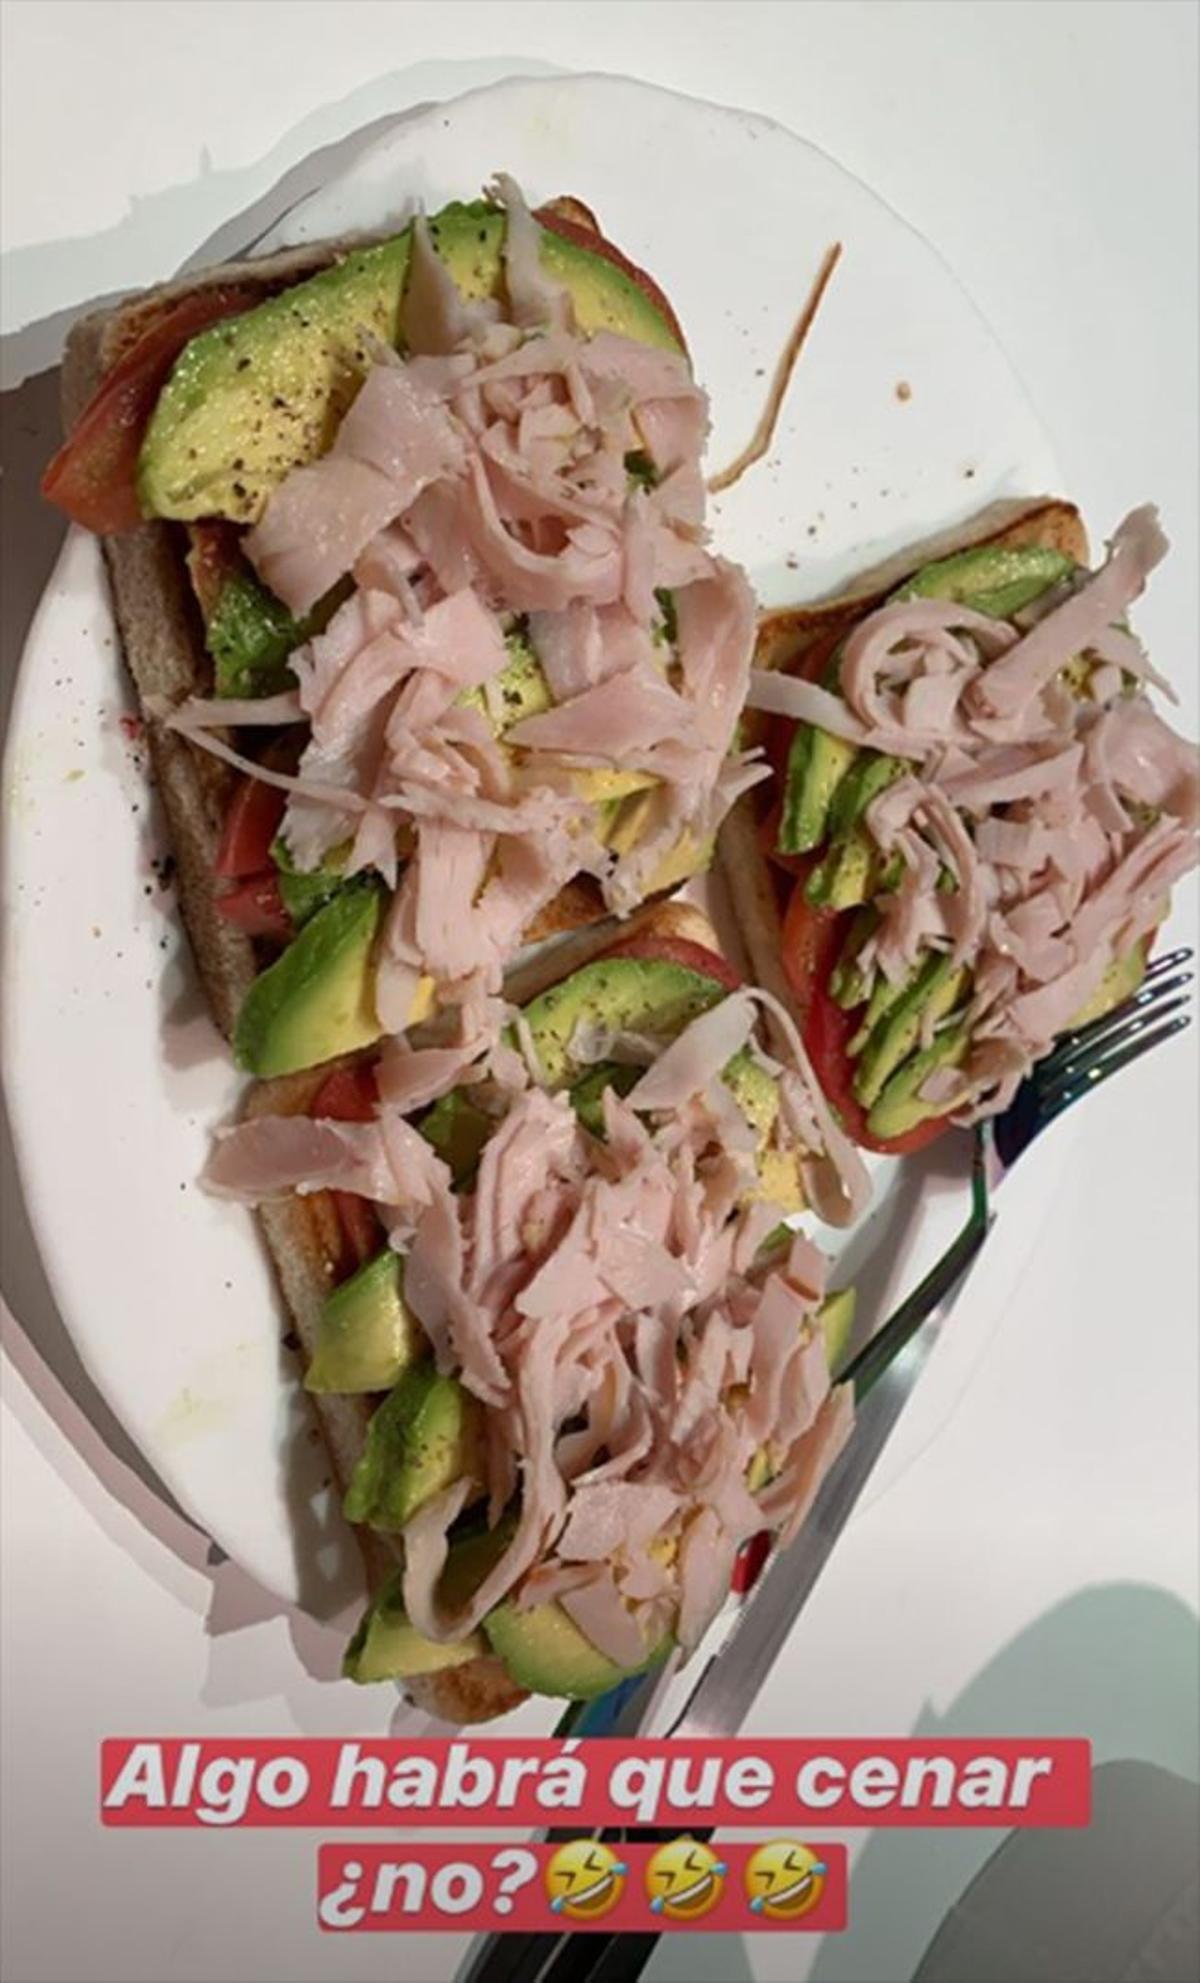 Tostadas con aguacate, pavo y tomate